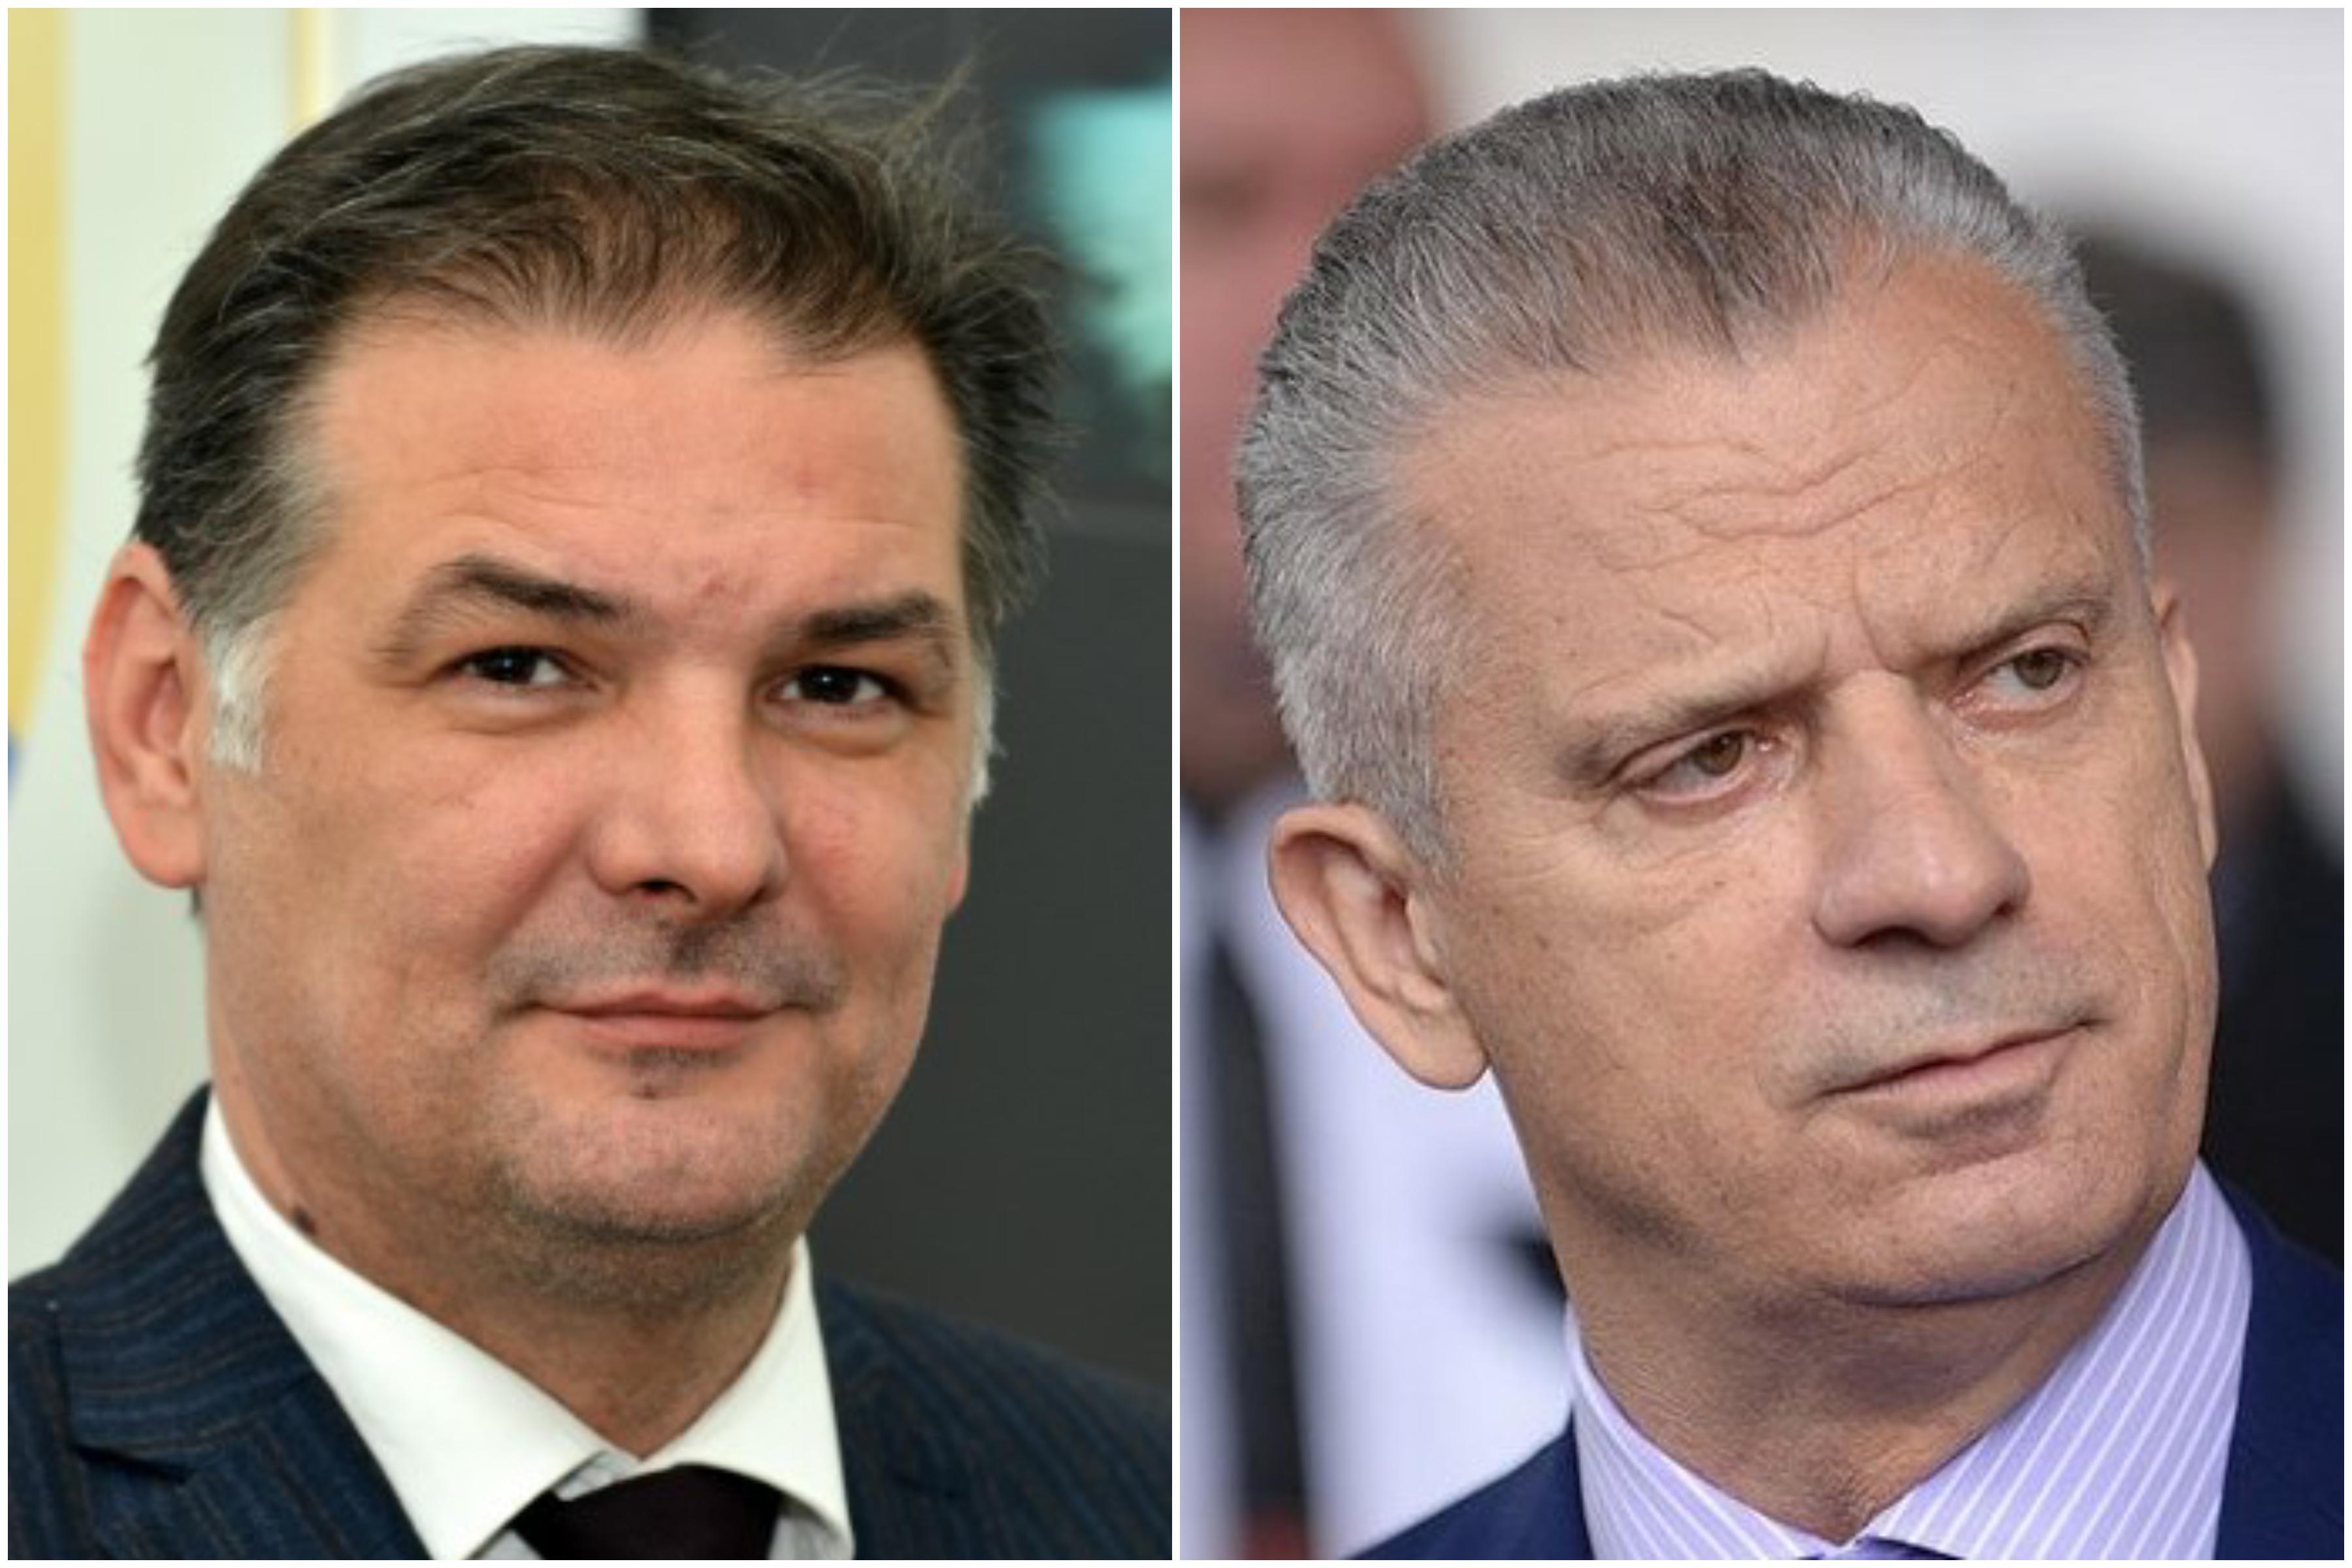 Only SBB, led by Radončić, is the alternative to the citizens